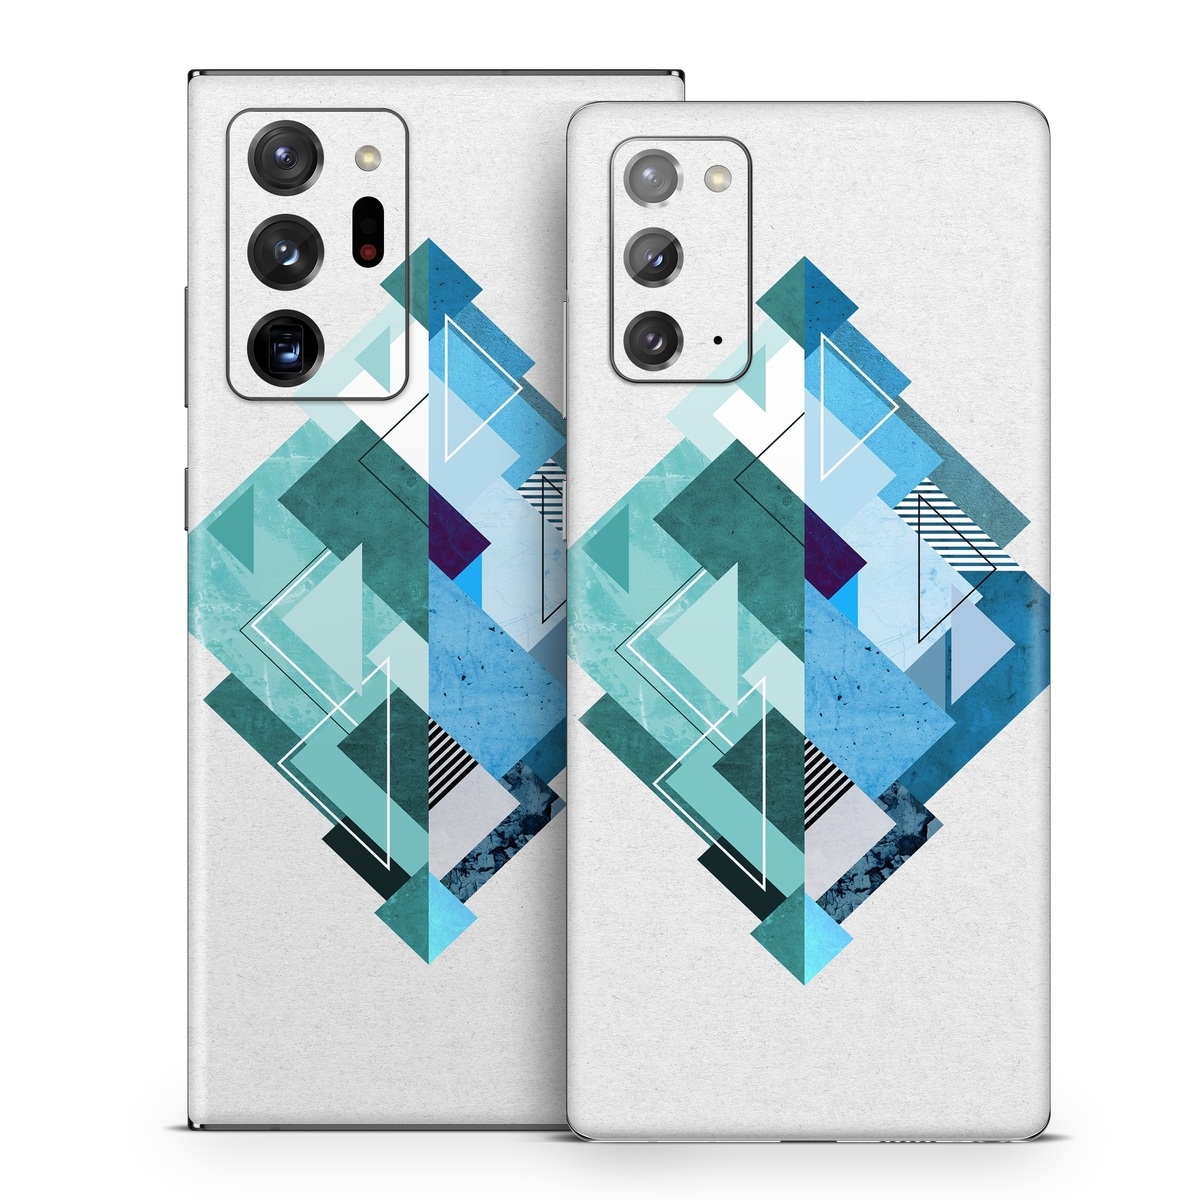 Samsung Galaxy Note 20 Series Skin design of Blue, Turquoise, Illustration, Graphic design, Design, Line, Logo, Triangle, Graphics, with gray, blue, purple colors